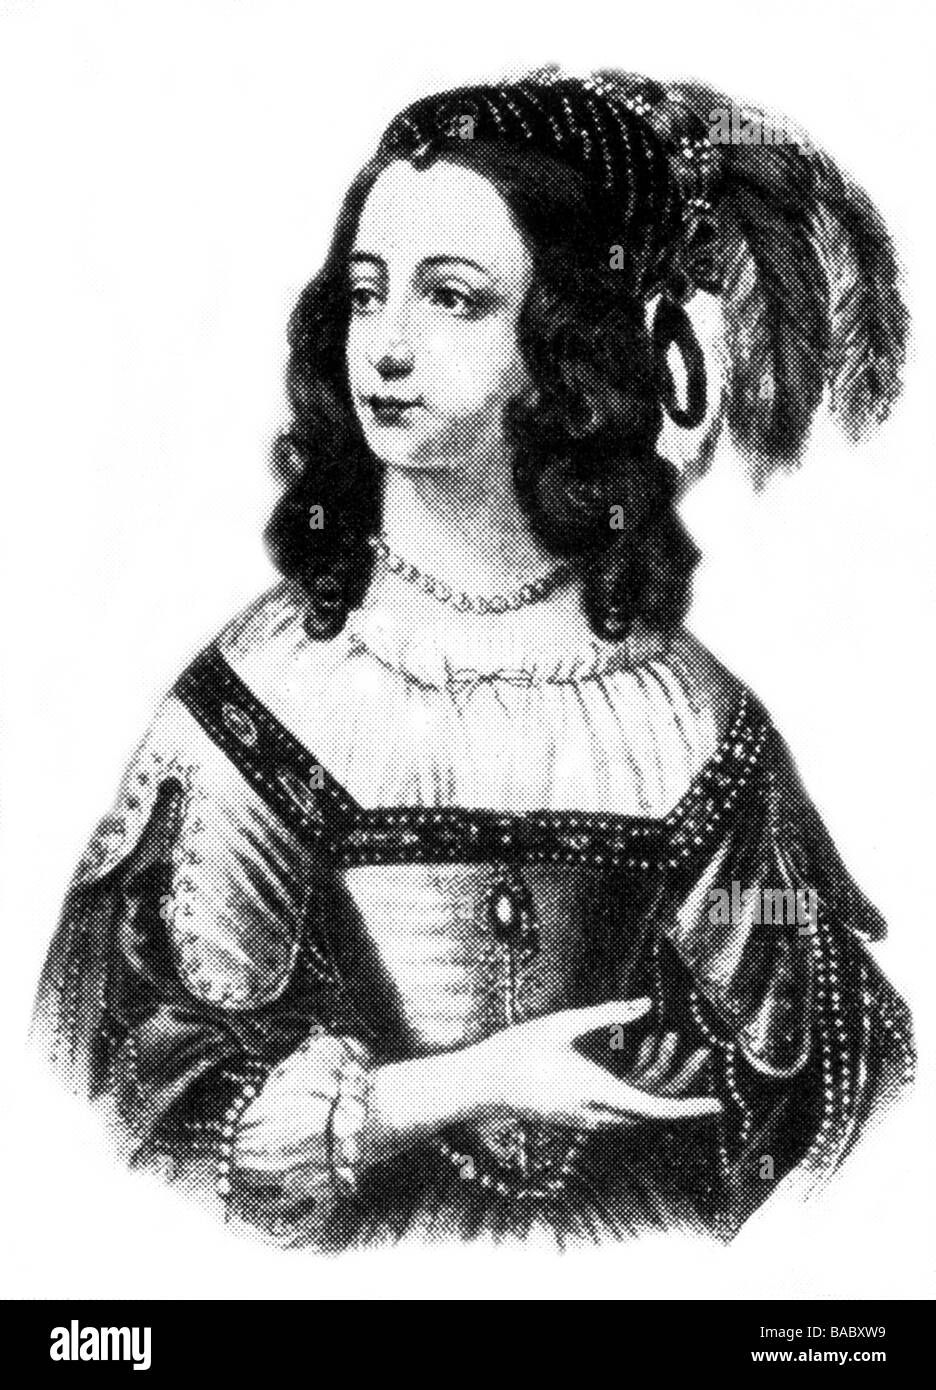 Sophia, 13.10.1630 - 8.4.1714, Electress Consort of Hanover 1692 - 1698, half length, after contemporary image, Stock Photo